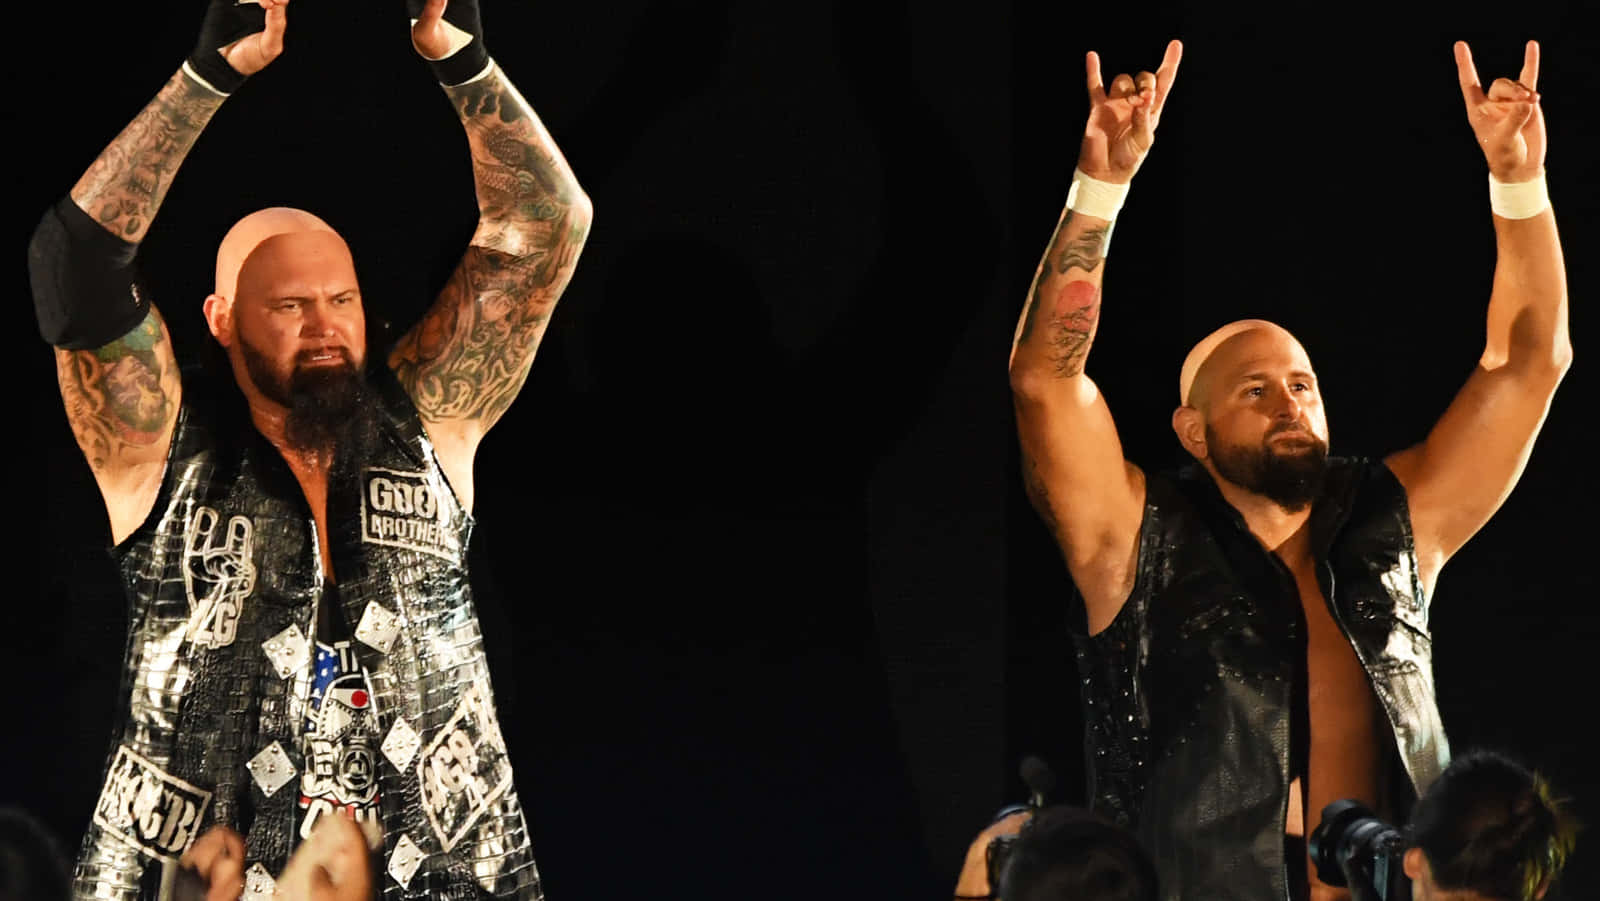 Rock And Roll Sign Of Karl Anderson&Doc Gallows Wallpaper